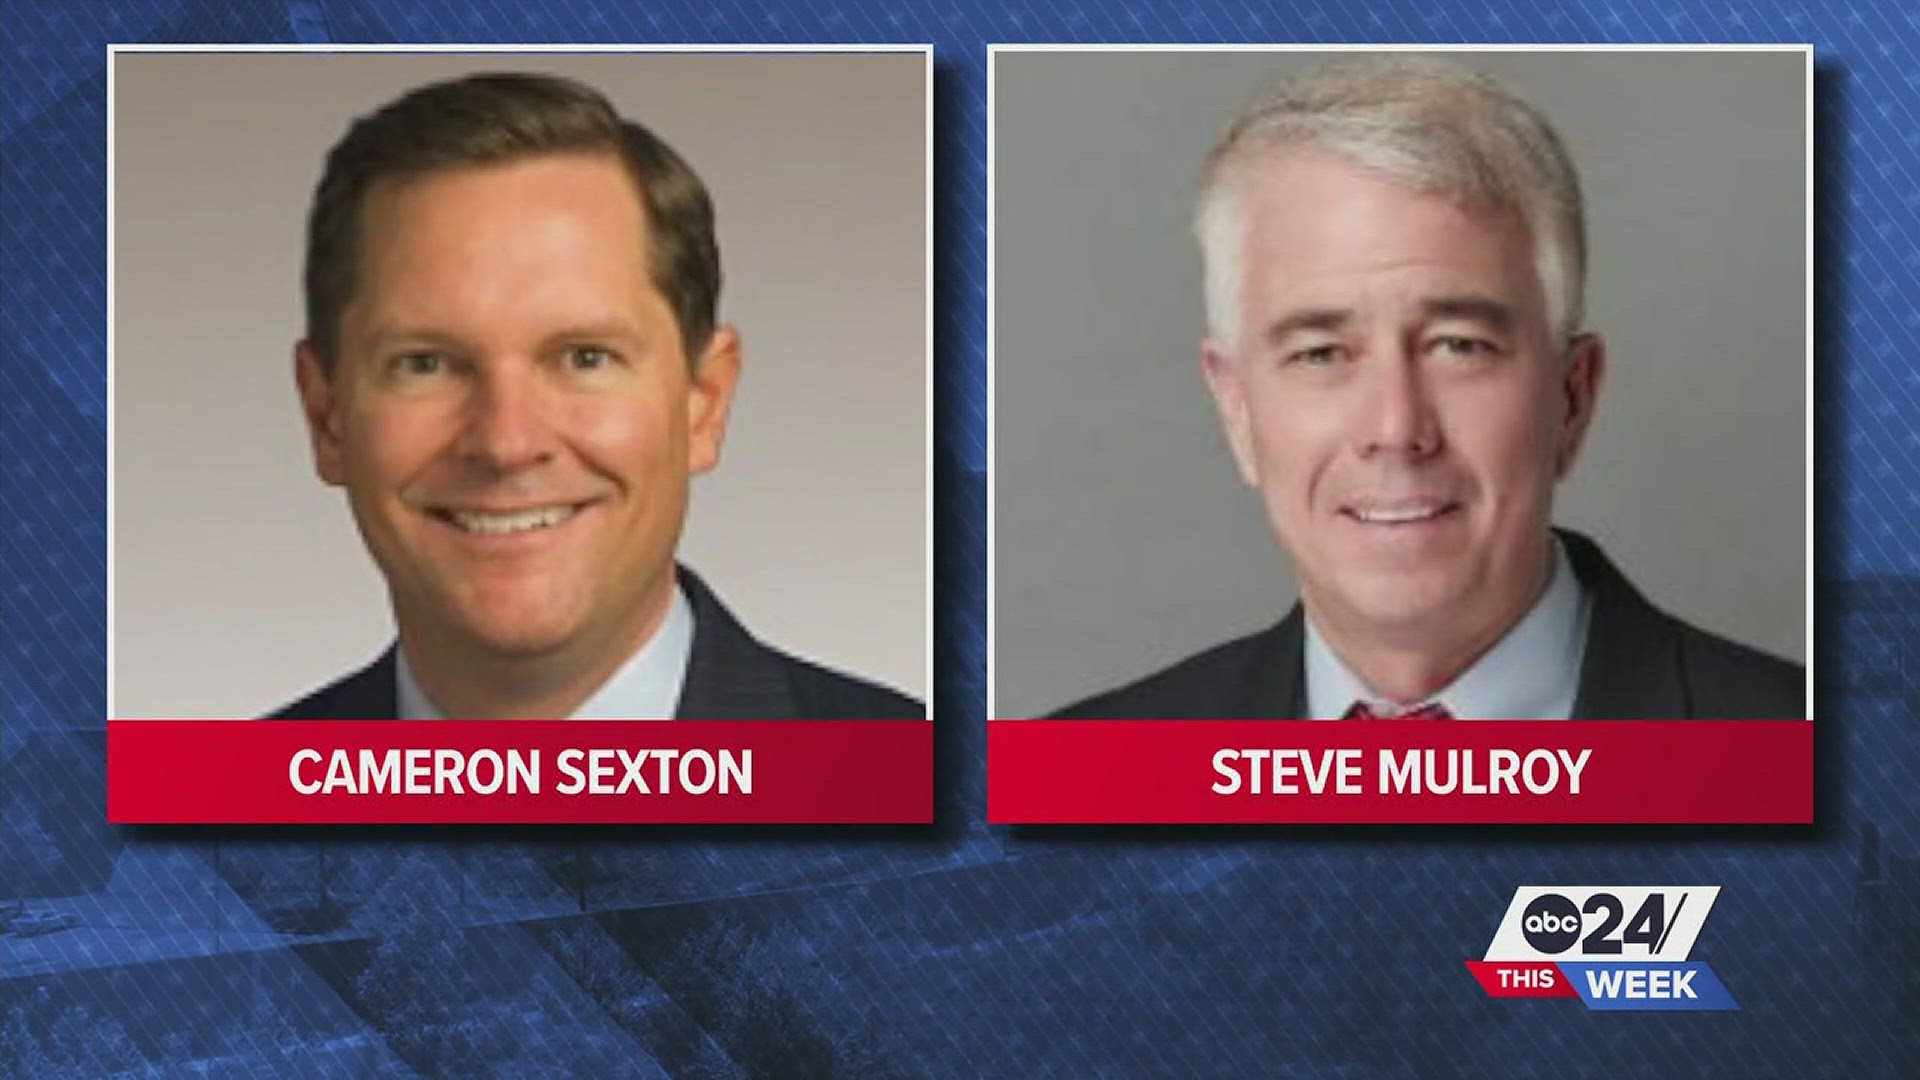 After Sexton's comments, Brent Taylor said he plans to file a Senate Joint Resolution immediately following the November election, requiring the removal of Mulroy.